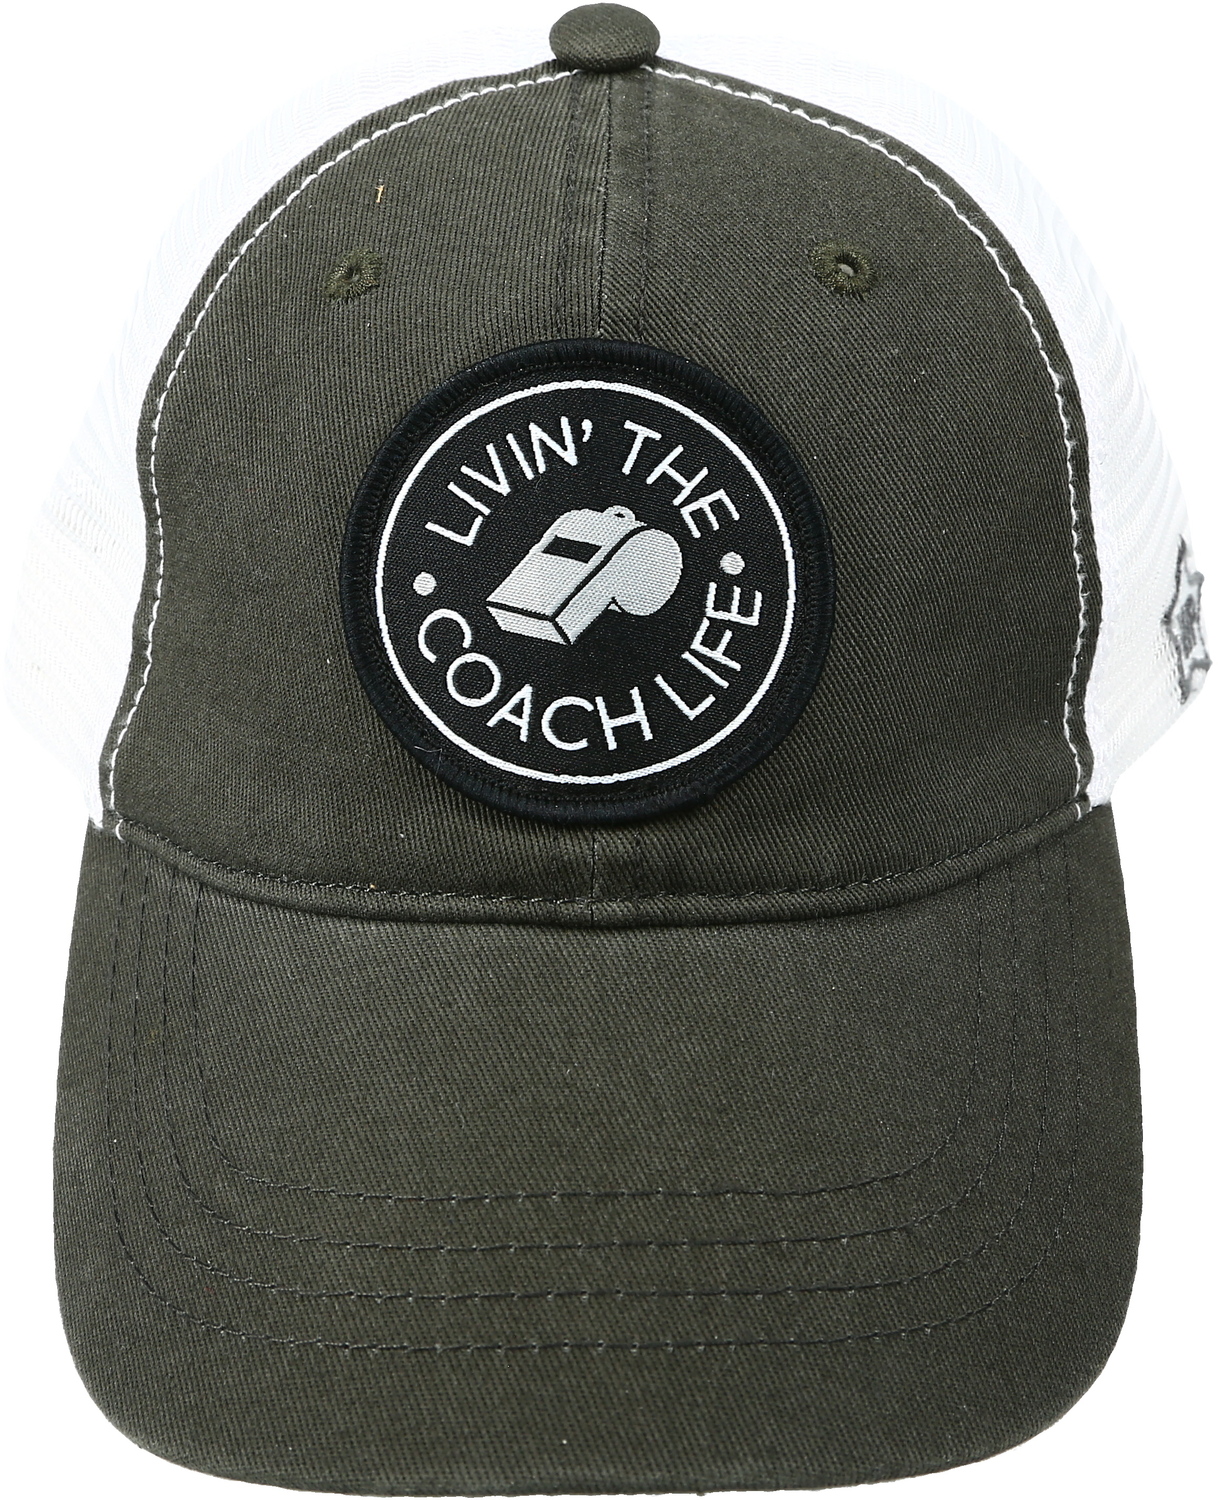 Coach Life by We People - Coach Life - Dark Gray Adjustable Mesh Hat